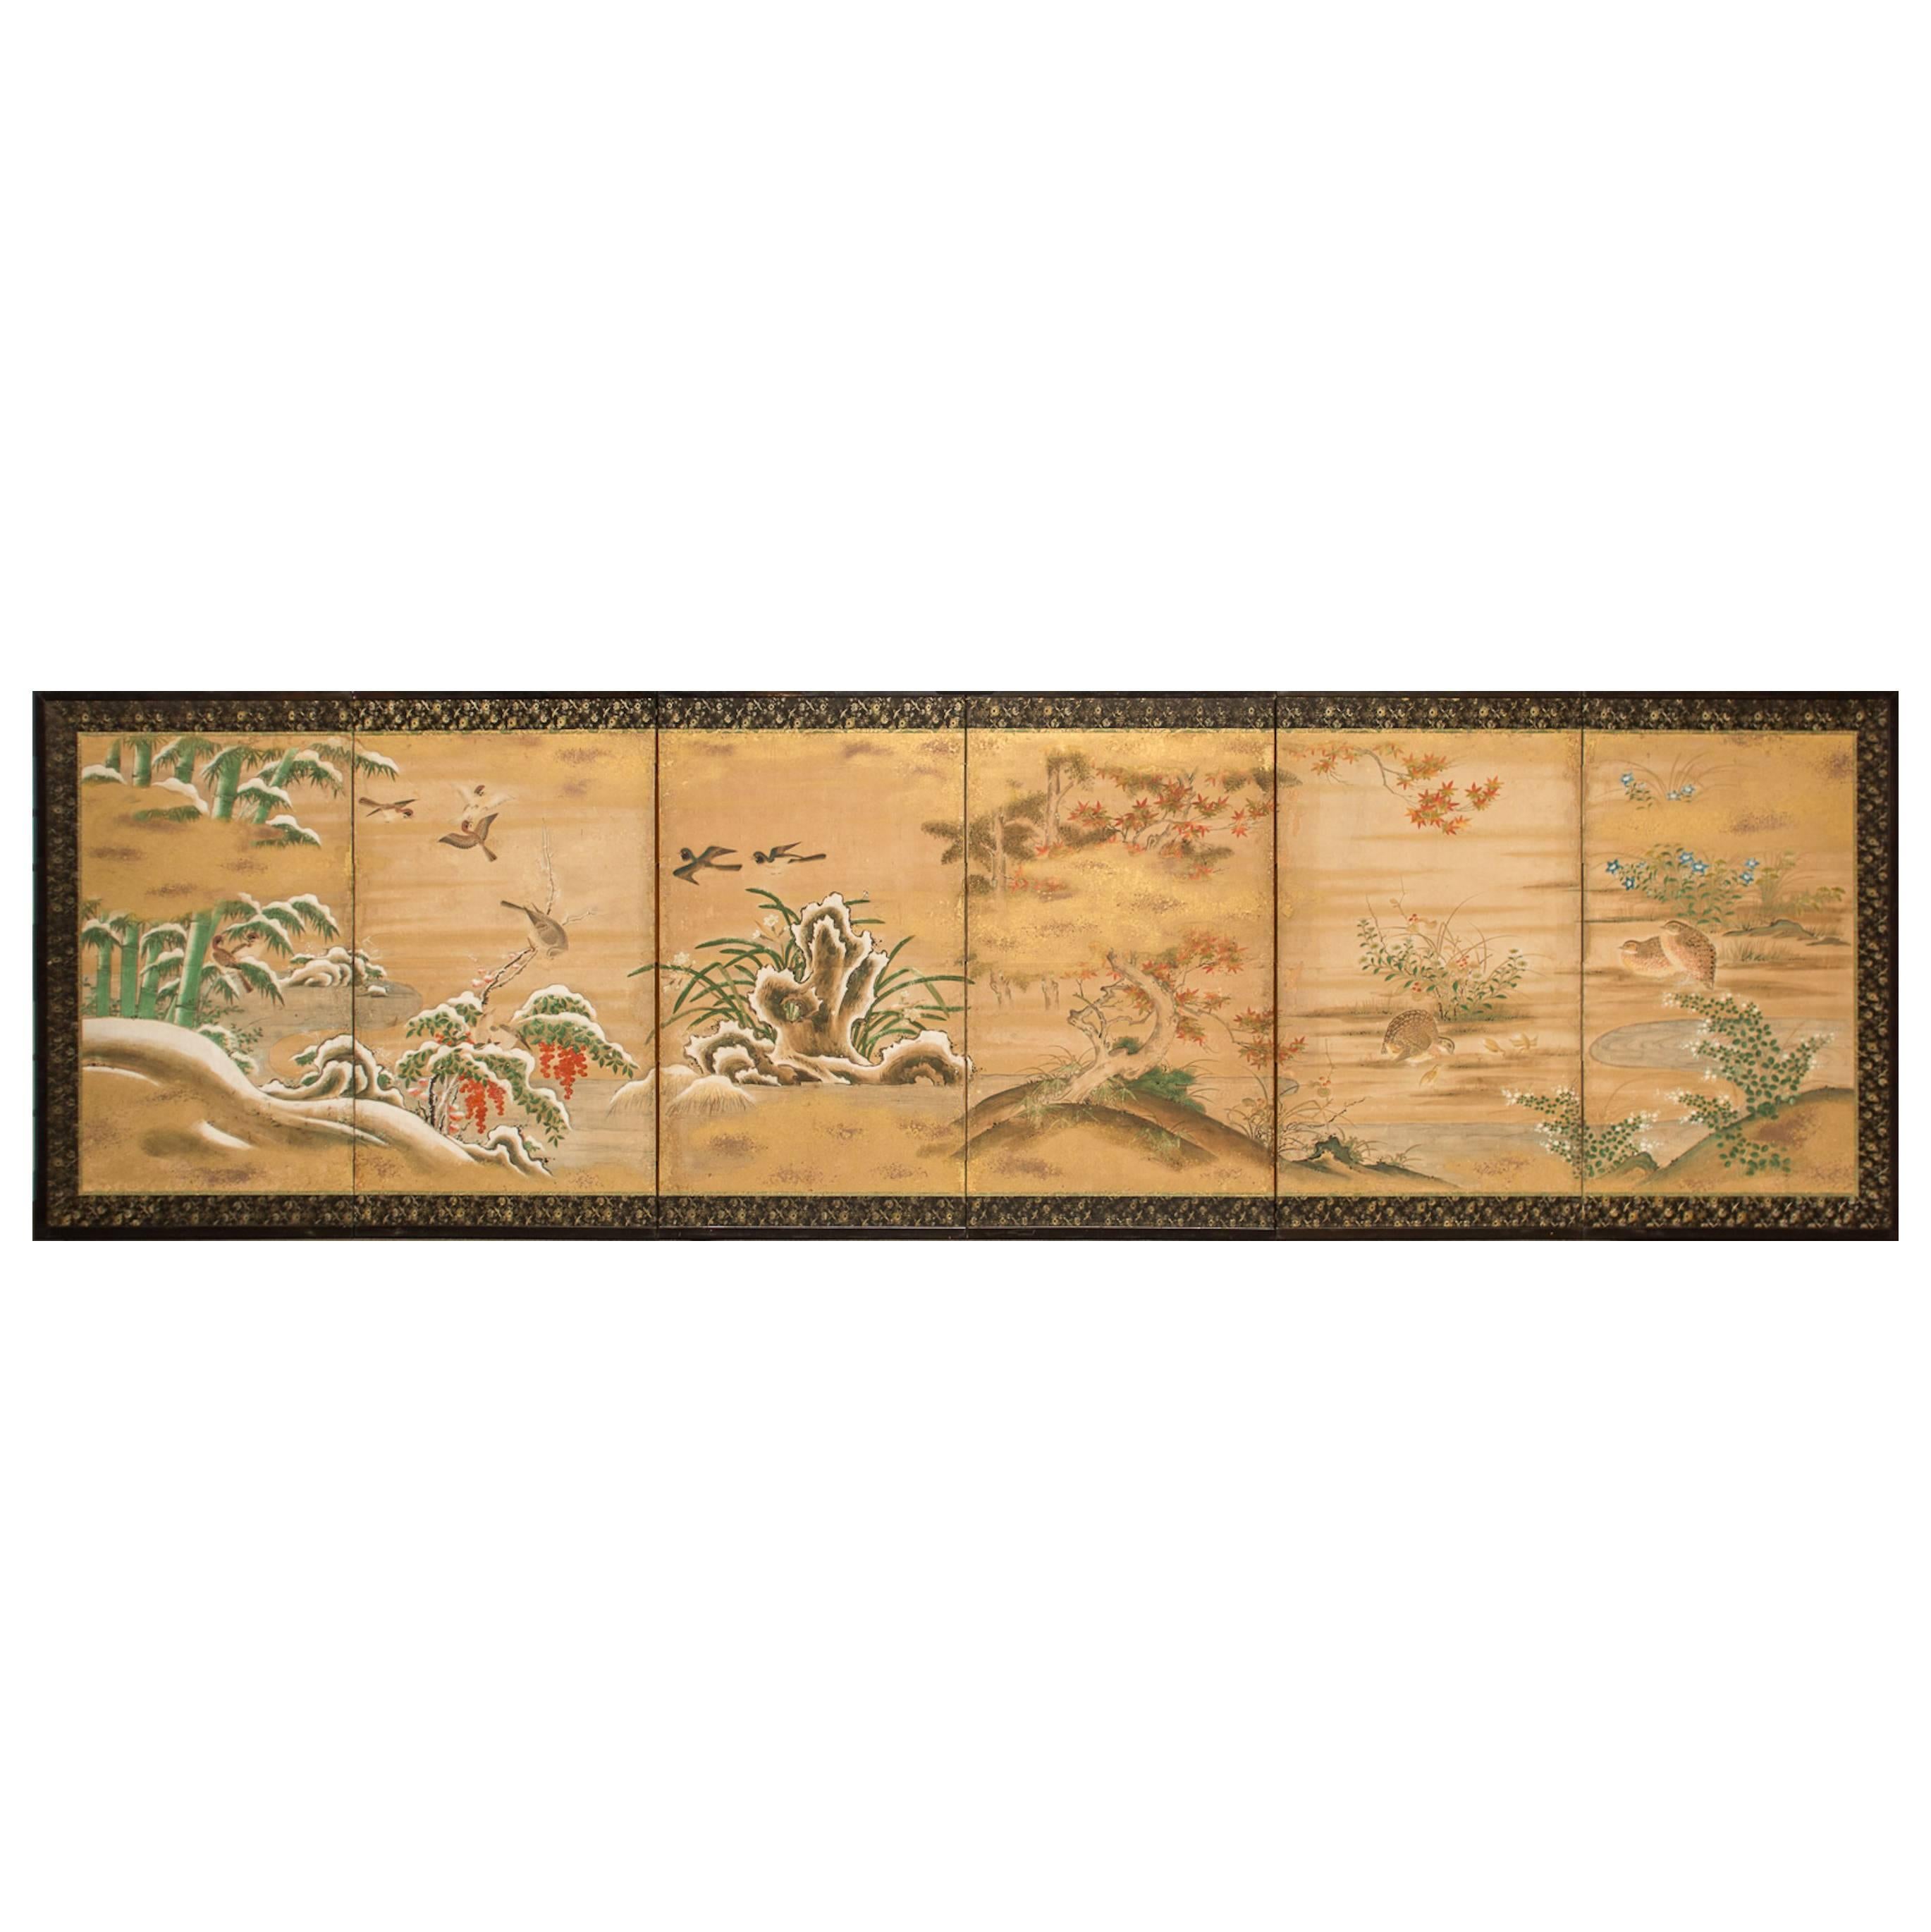 Japanese Six Panel Screen: Rimpa School Painting of Winter to Spring